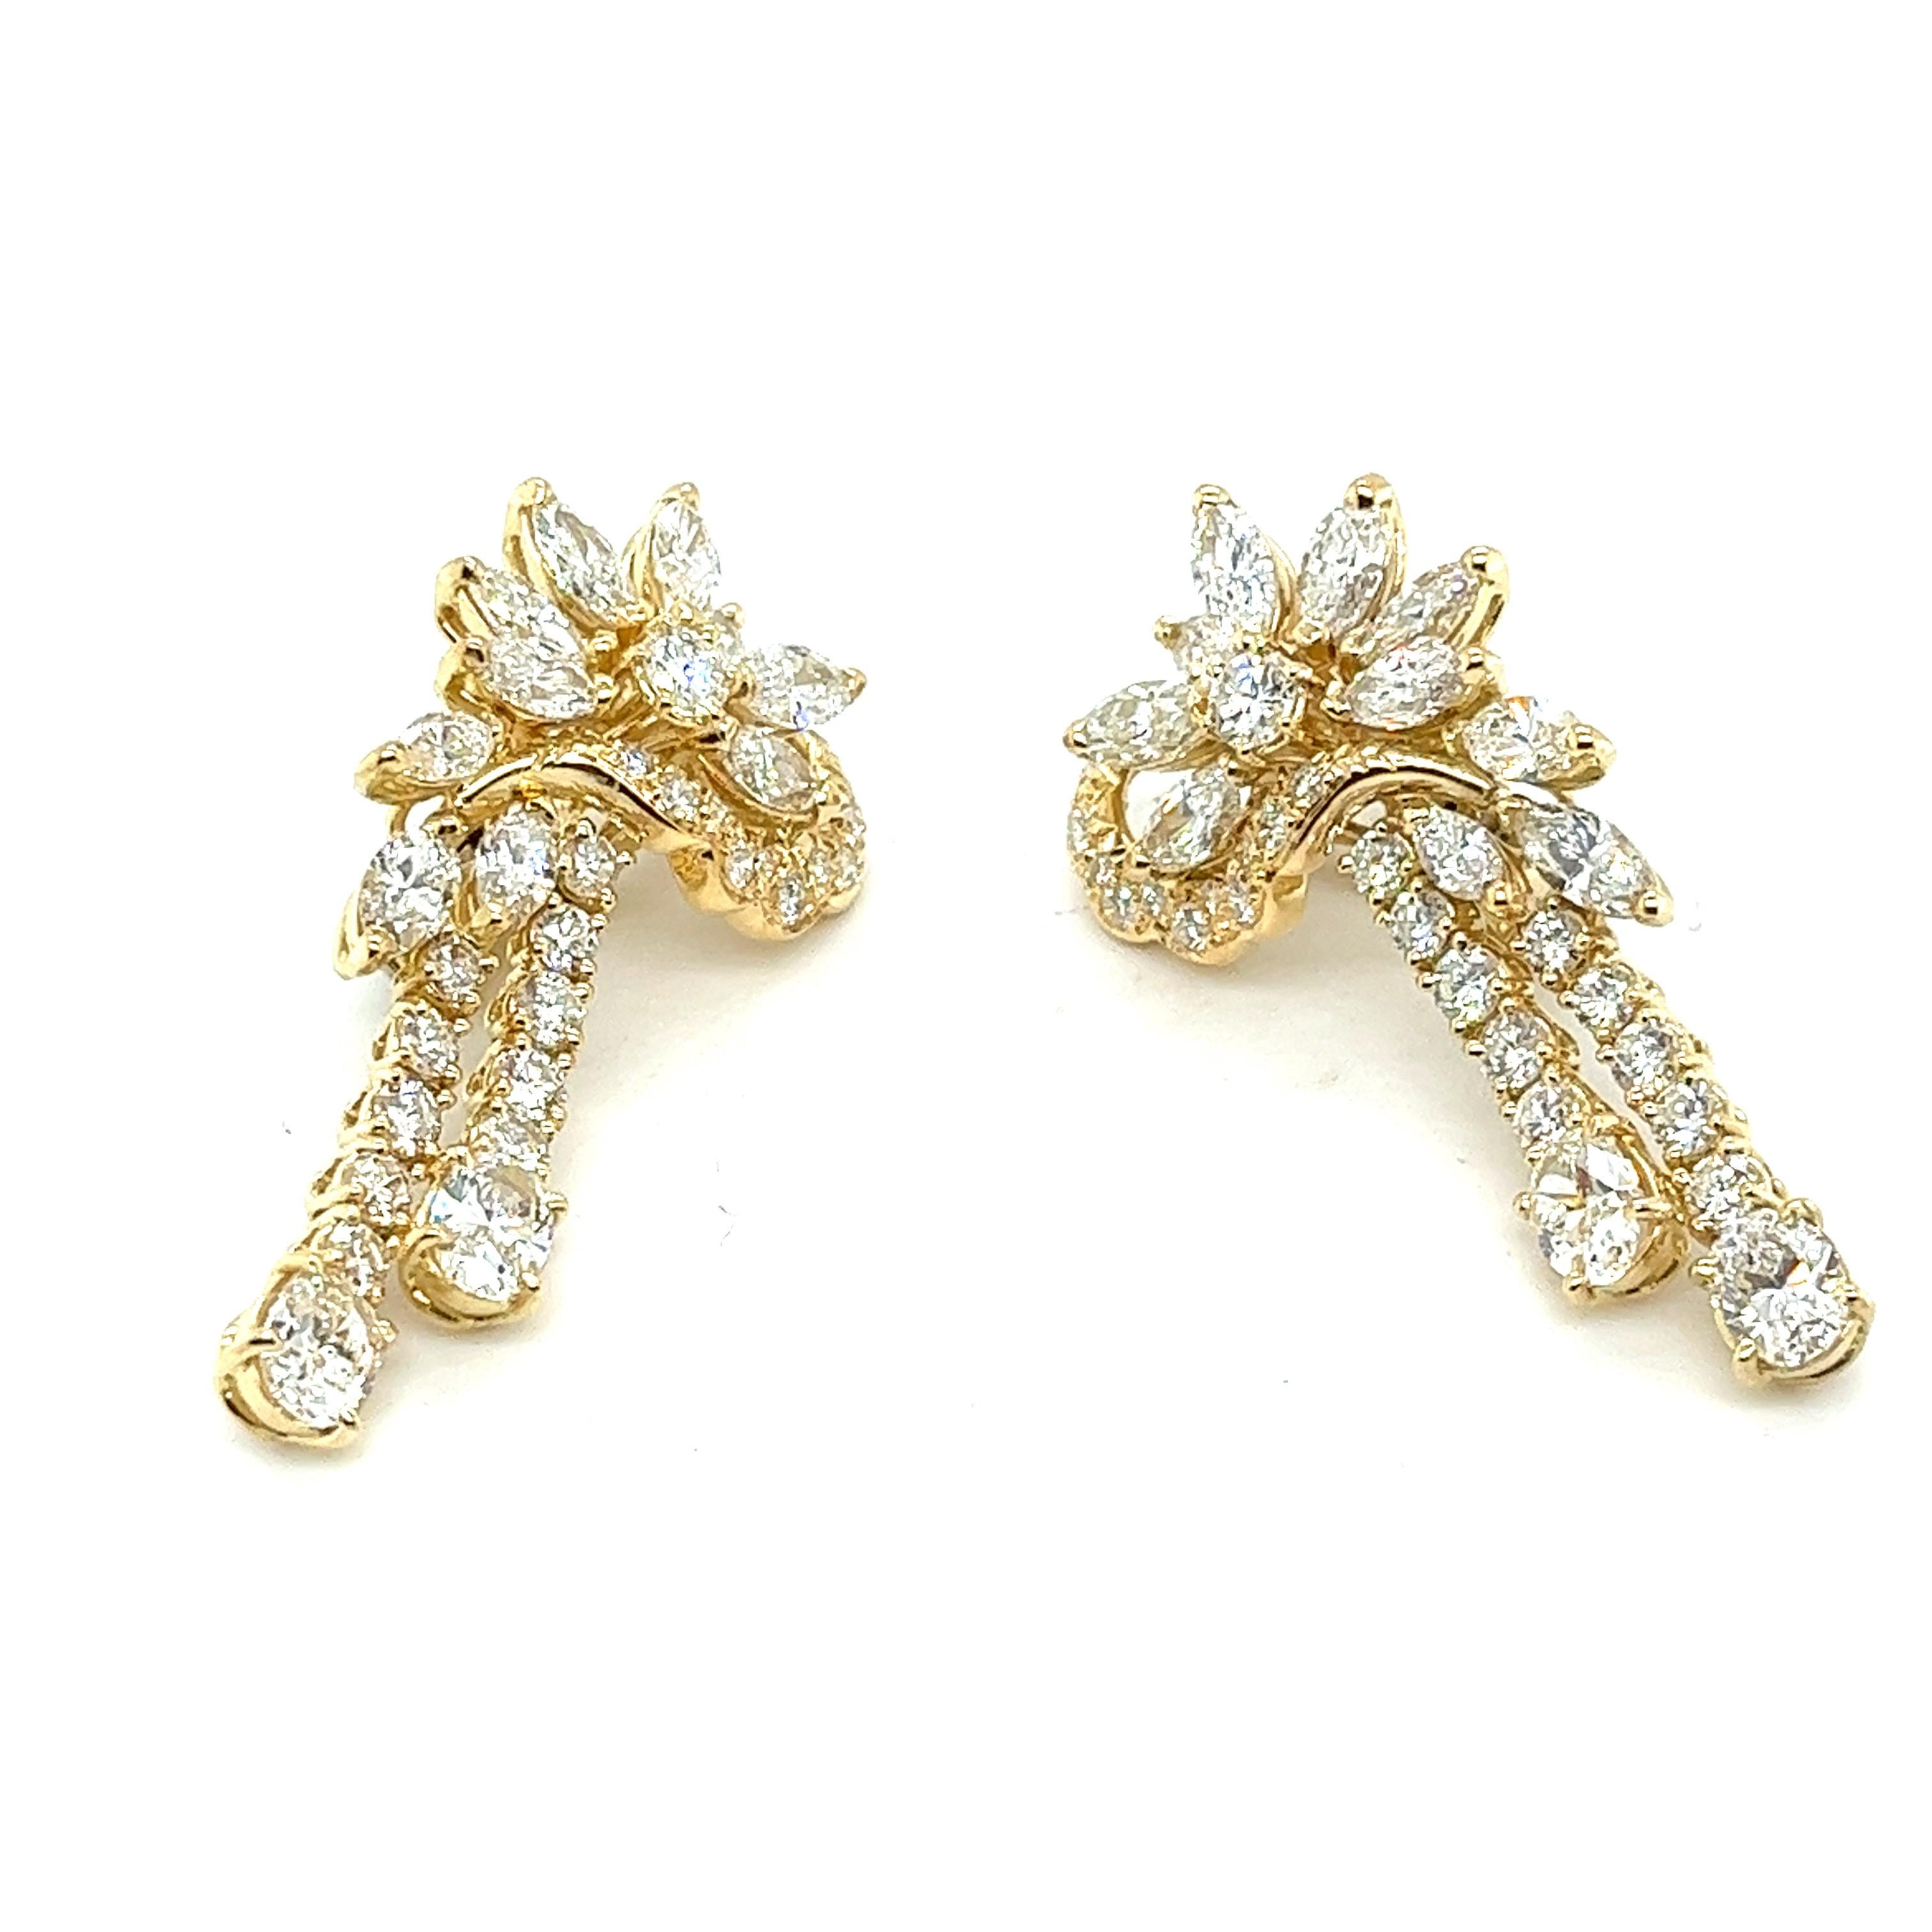 Timeless Vintage 18 Karat Gold Diamond Earrings

Description:
These vintage 18 karat yellow gold earrings are a true testament to timeless elegance. Crafted in the 1980s, they feature an exquisite array of natural earth mined diamonds, totaling